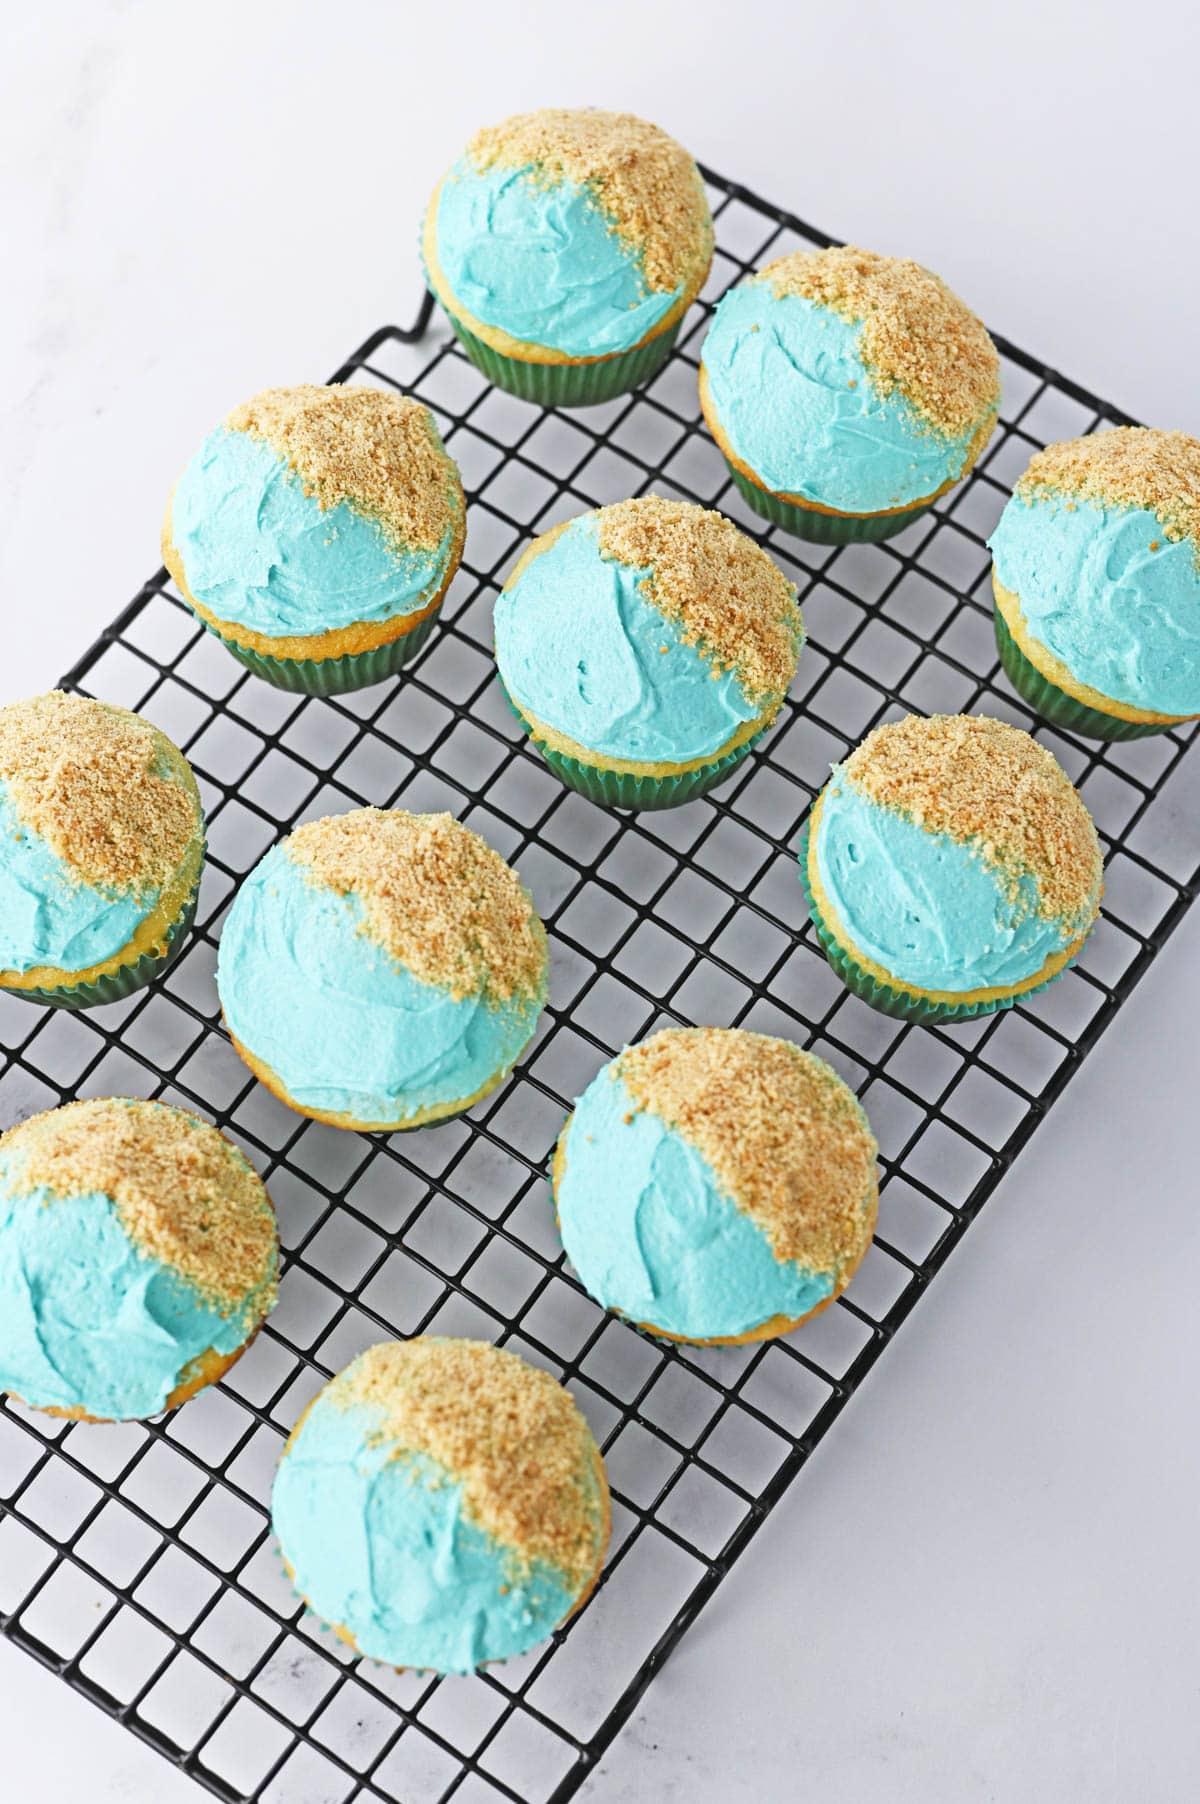 Crushed Nilla Wafers and blue frosting on cupcakes